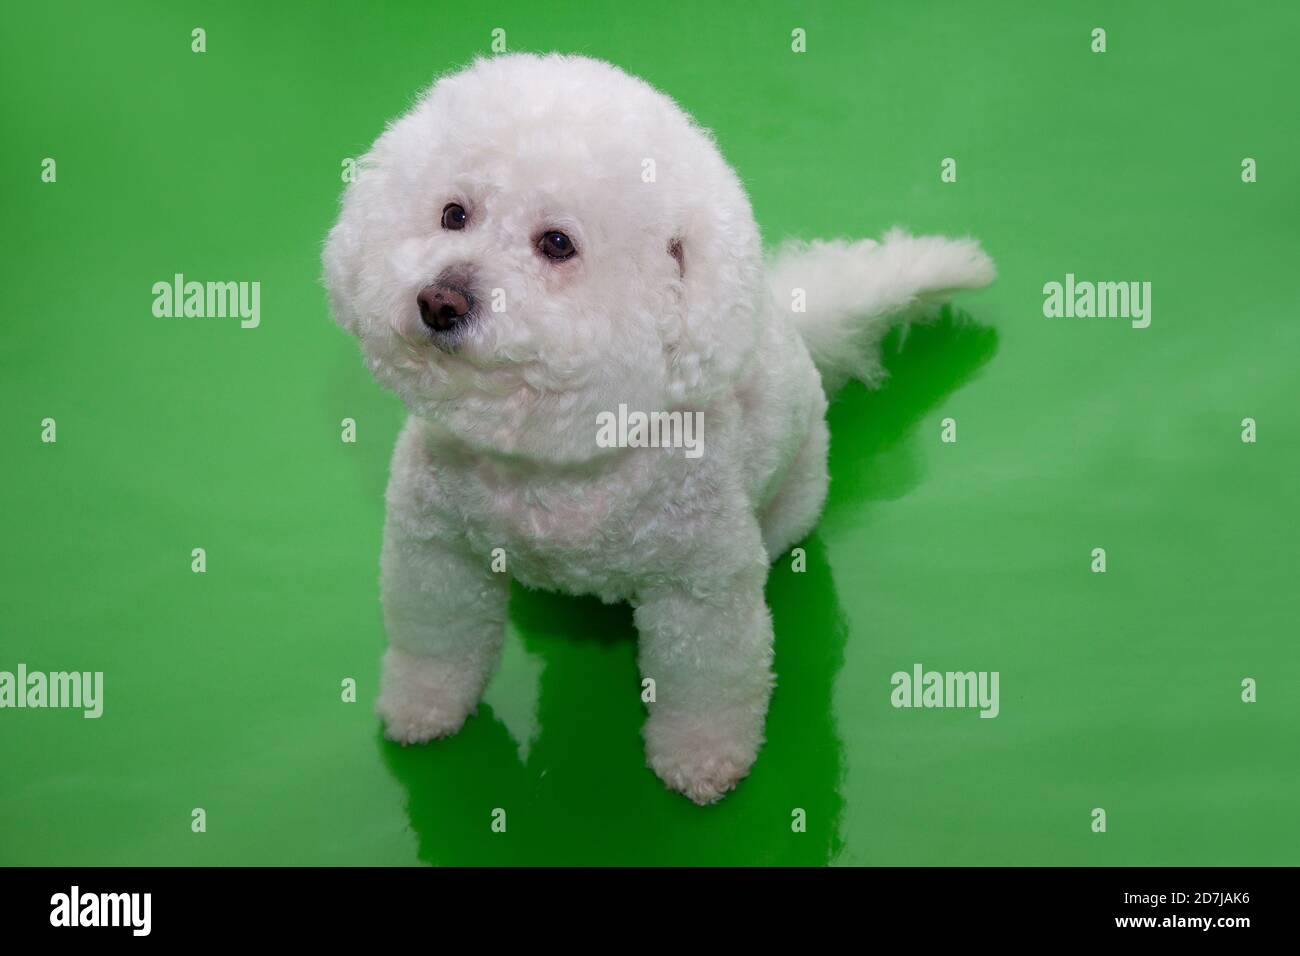 Cute bichon frise isolated on a green background. Pet animals. Stock Photo